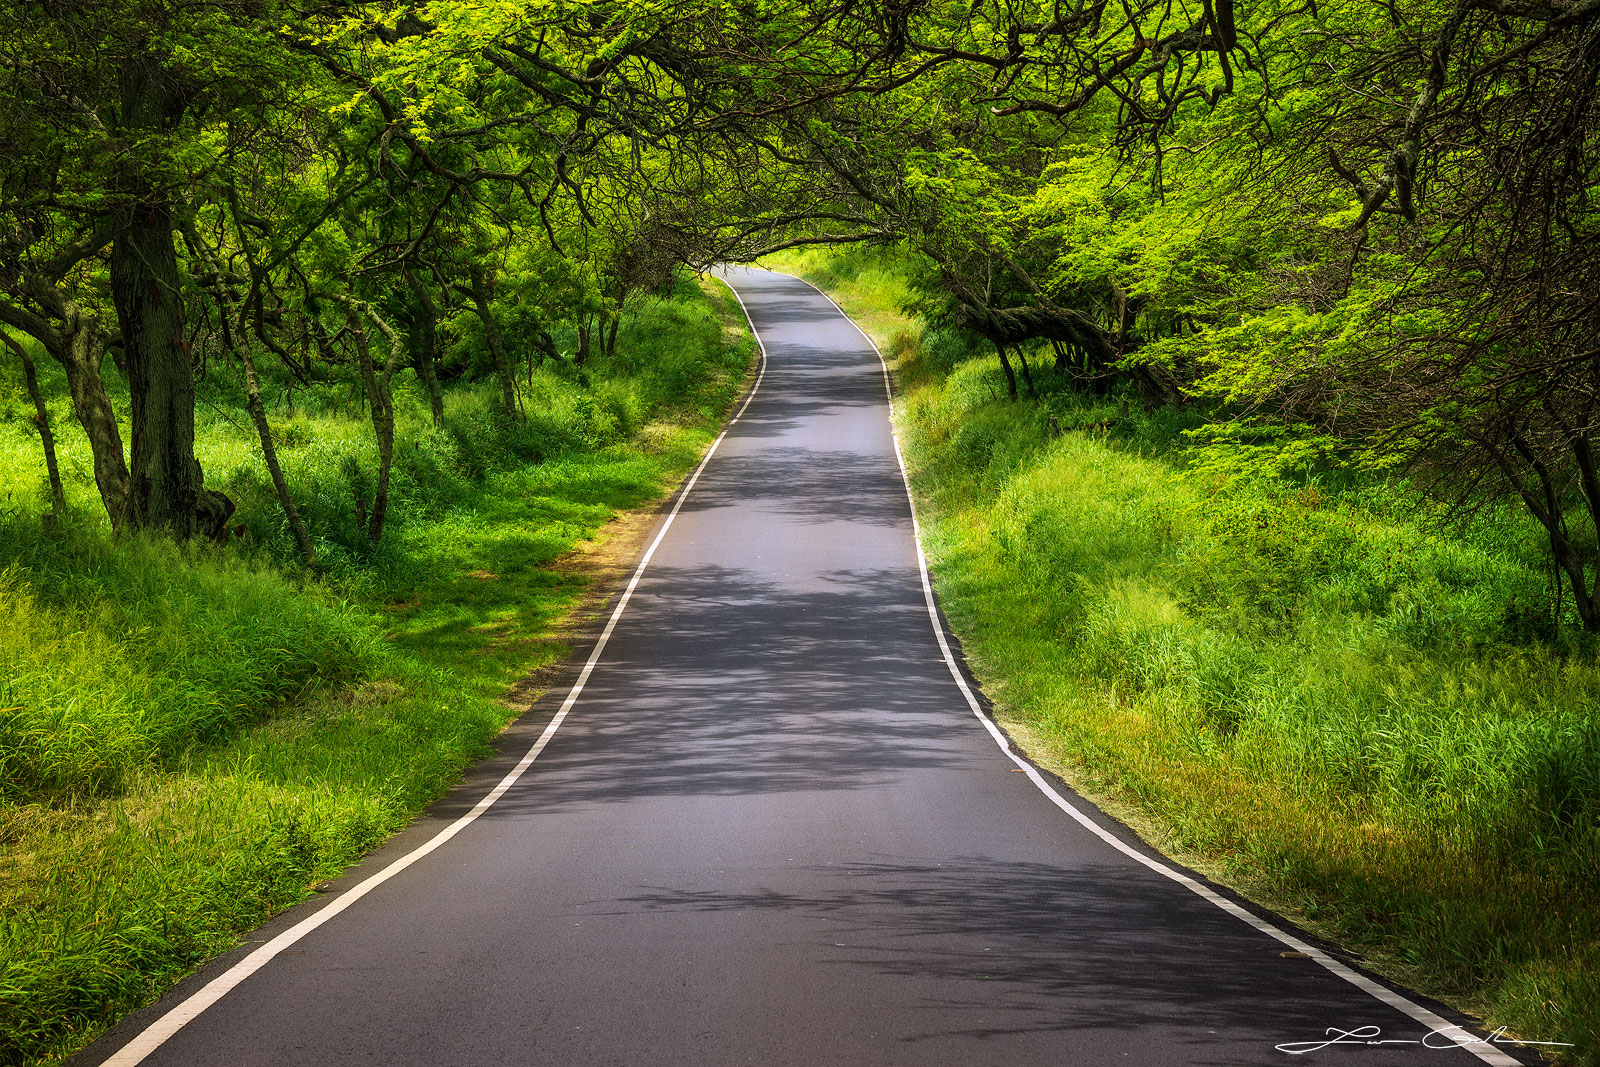 A fine art photo print titled 'Country Road' showing a winding, black paved road descending and ascending amidst lush green vegetation forming a tree tunnel in Maui, Hawaii, predominantly in green and black tones - Gintchin Fine Art